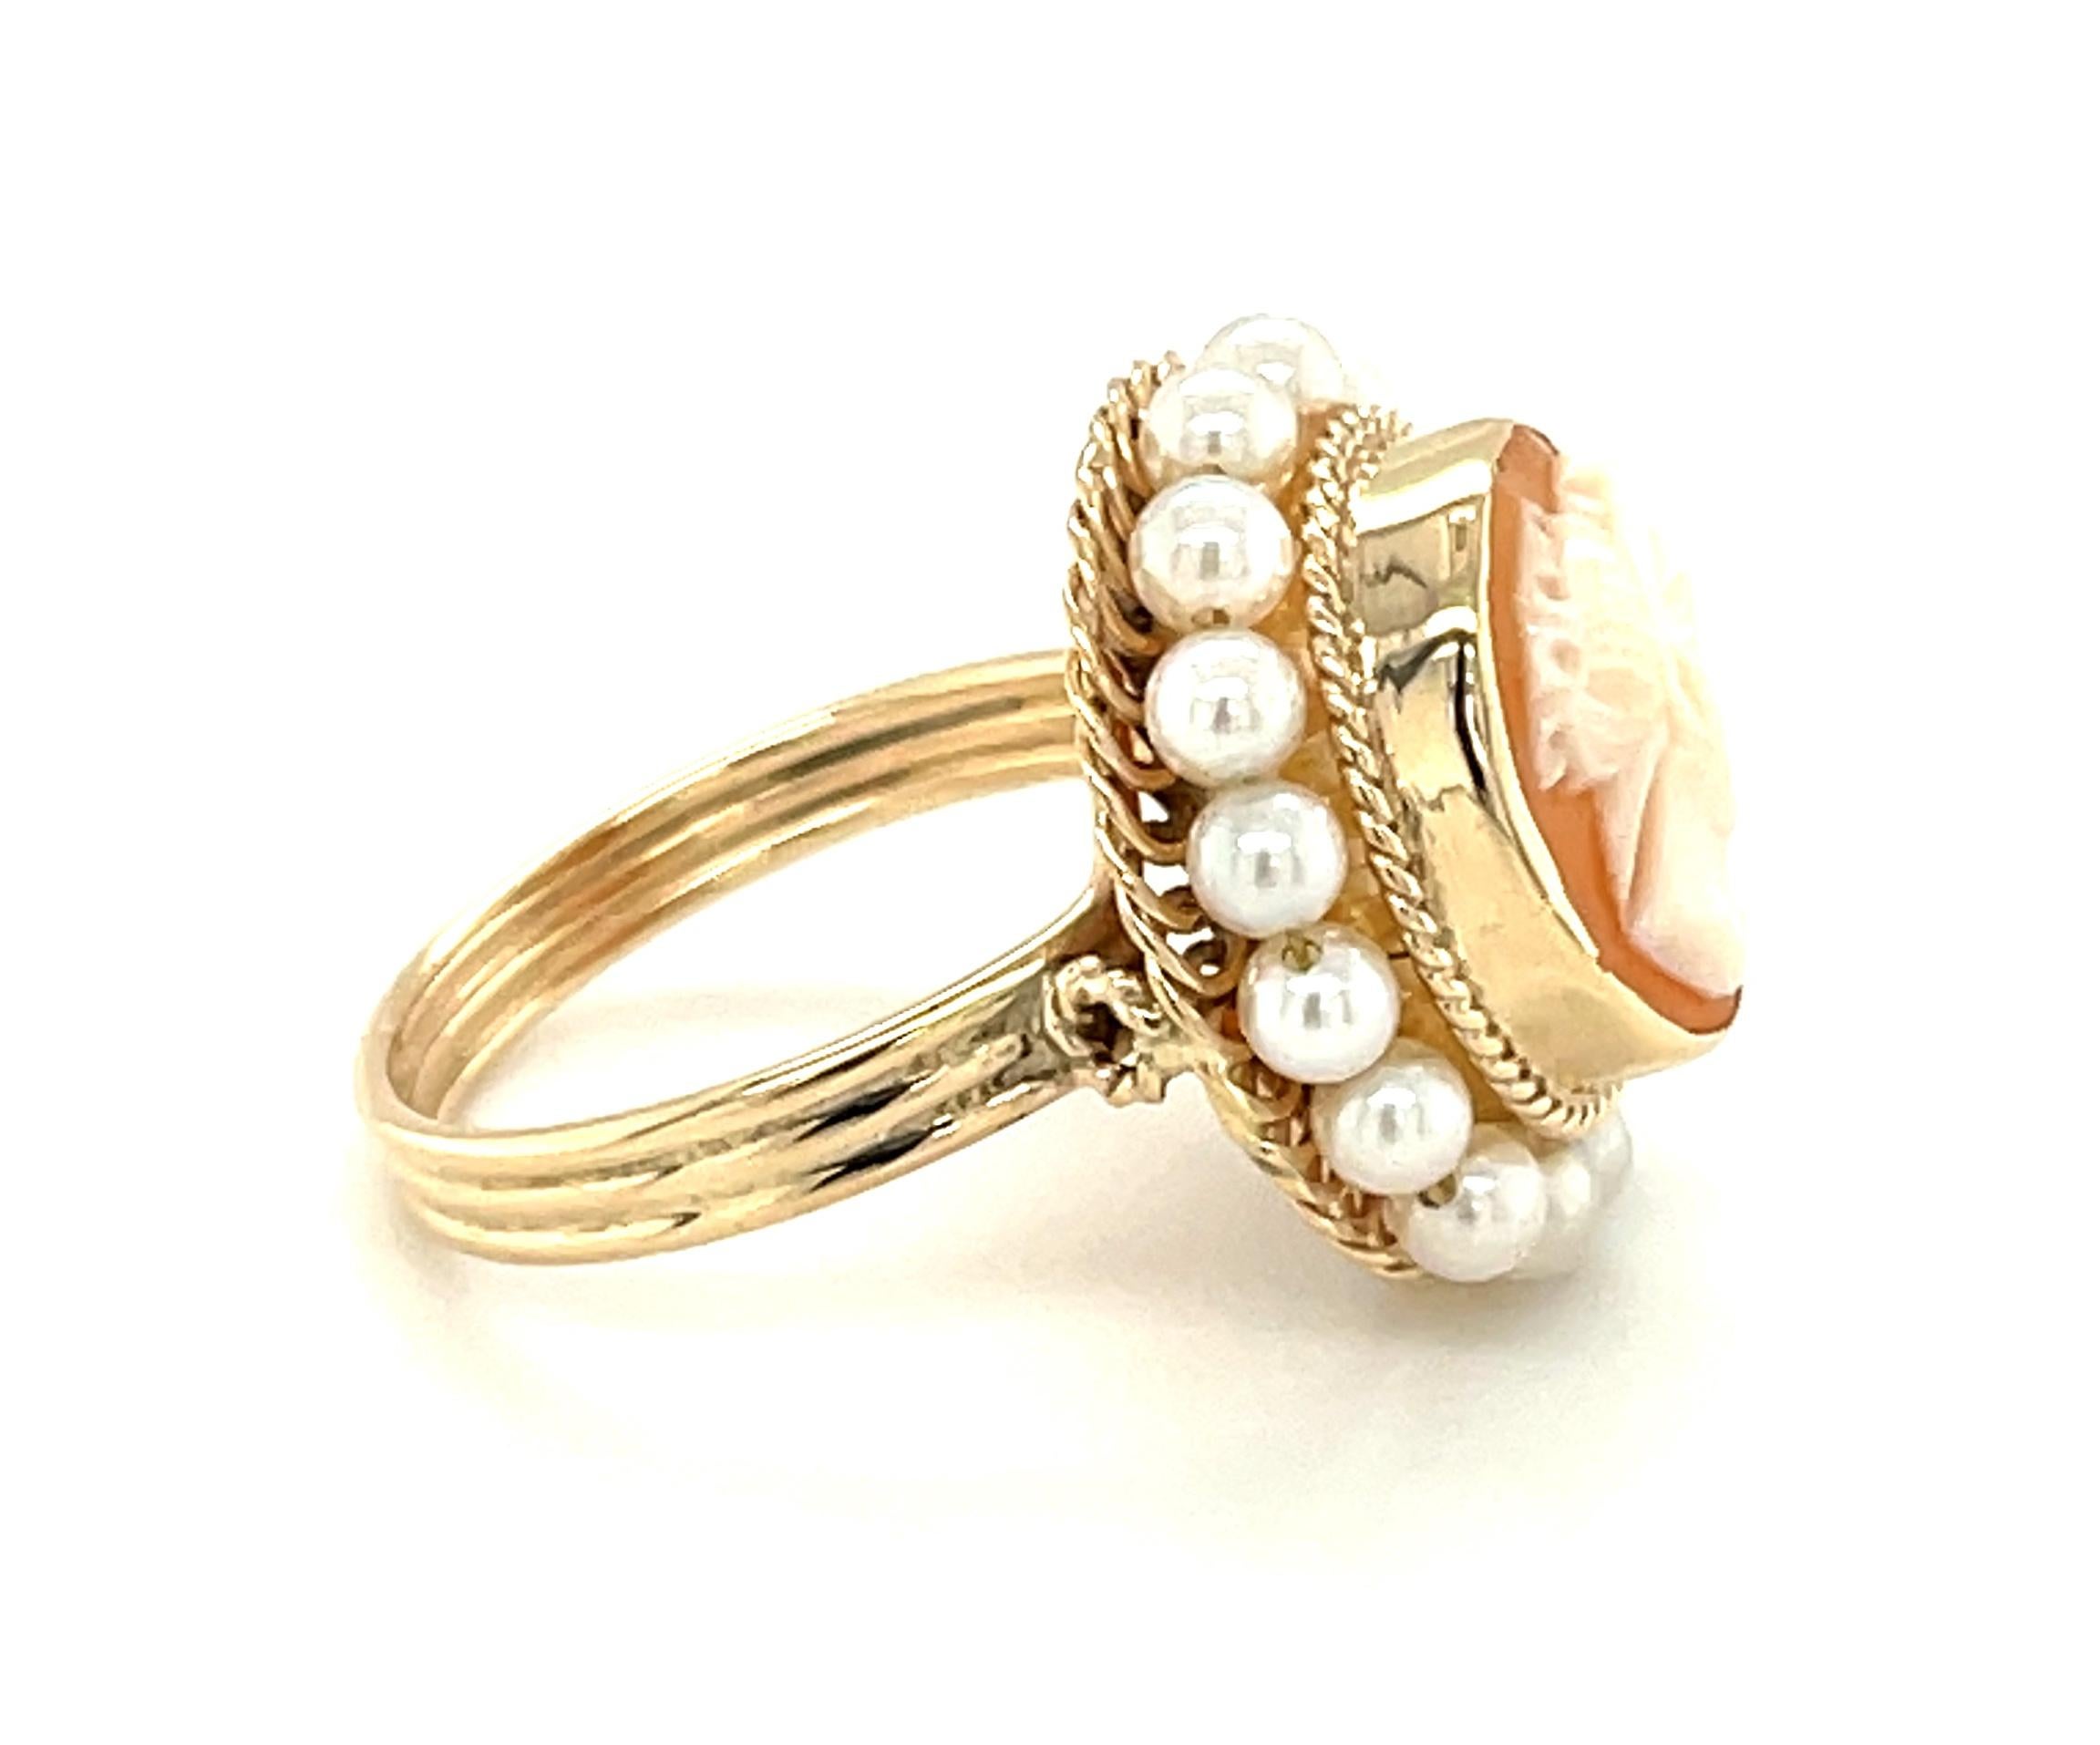 This pretty cocktail ring features a lovely shell cameo that was beautifully hand carved in Italy. The cameo is bezel set and encircled with 3mm seed pearls that have been hand-strung on fine gold wire. The pearls sit atop an intricate frame of fine